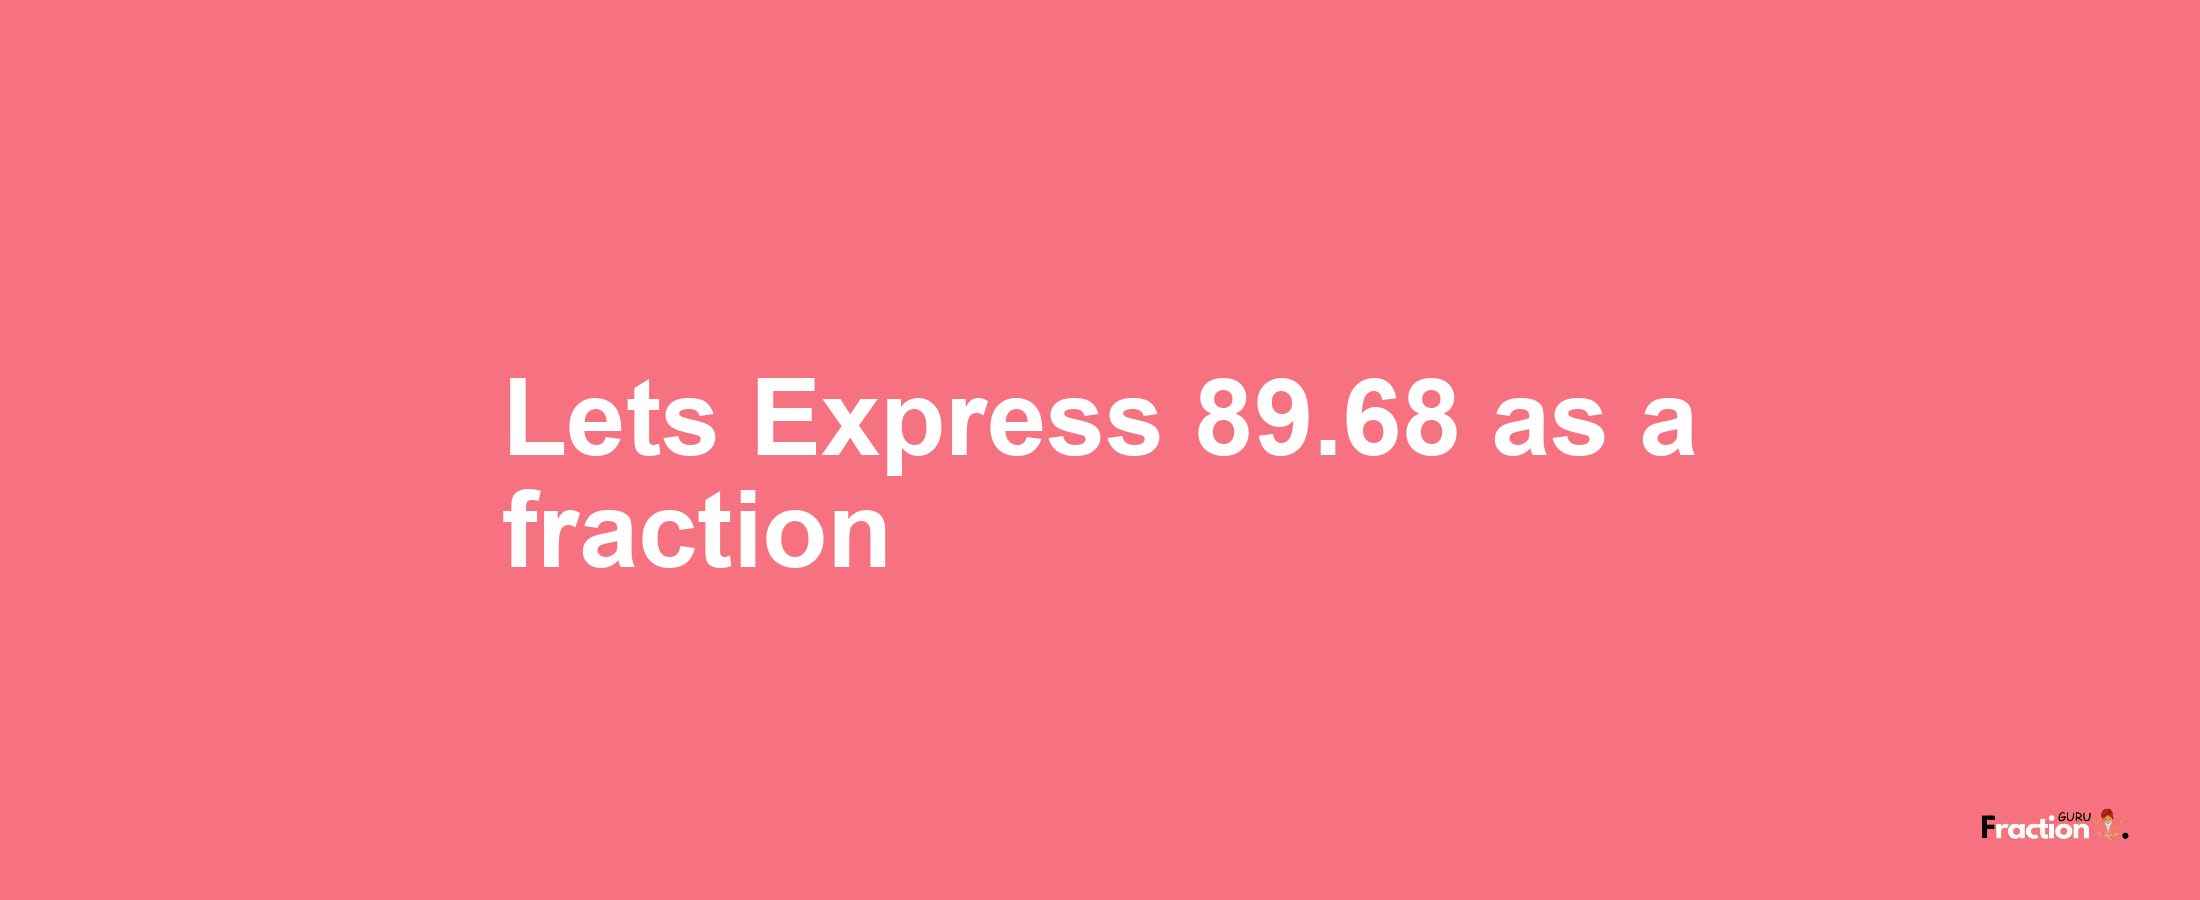 Lets Express 89.68 as afraction